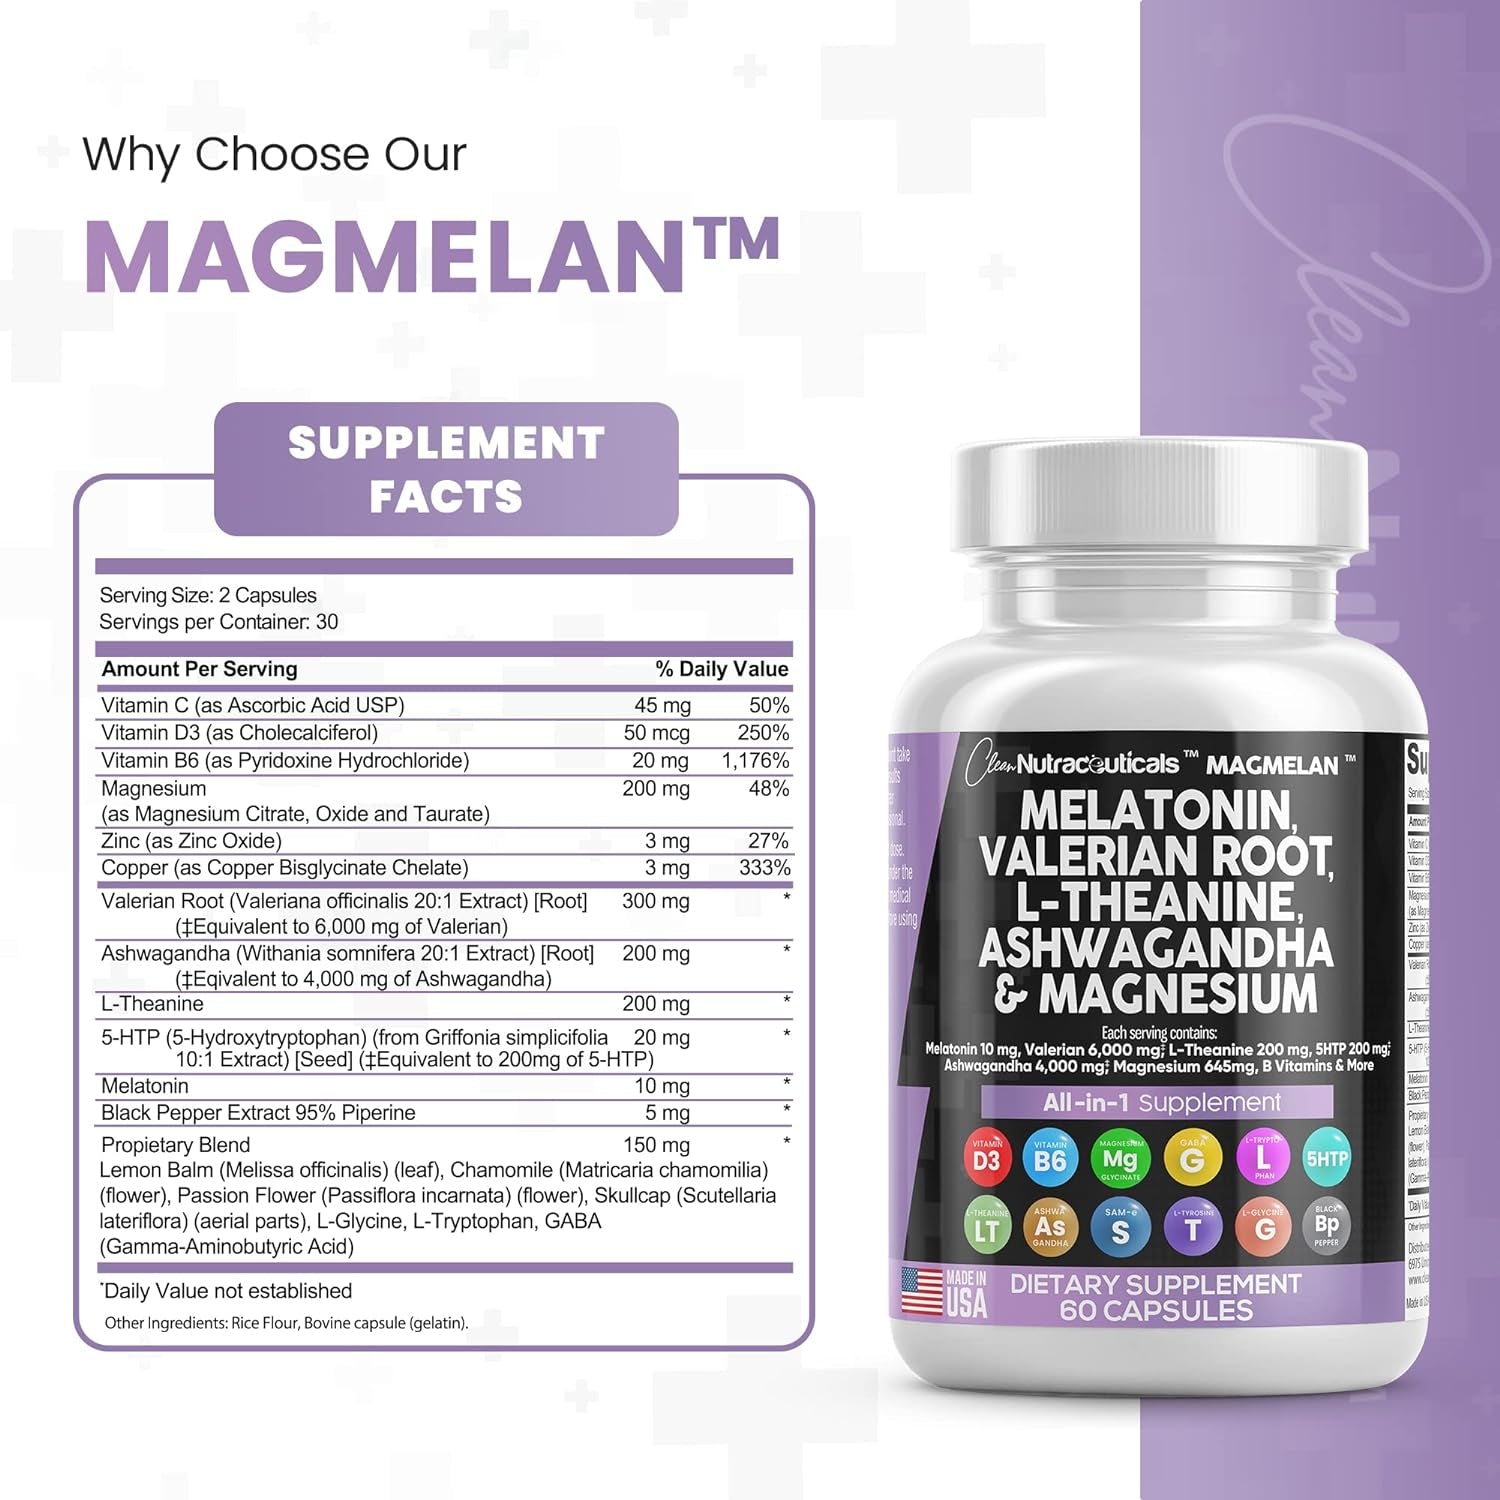 Melatonin 10Mg Valerian Root 6000Mg L Theanine 200Mg Ashwagandha 4000Mg - Sleep Support for Women & Men with Magnesium Complex, Lemon Balm, Chamomile, & Passion Flower - 60 Caps